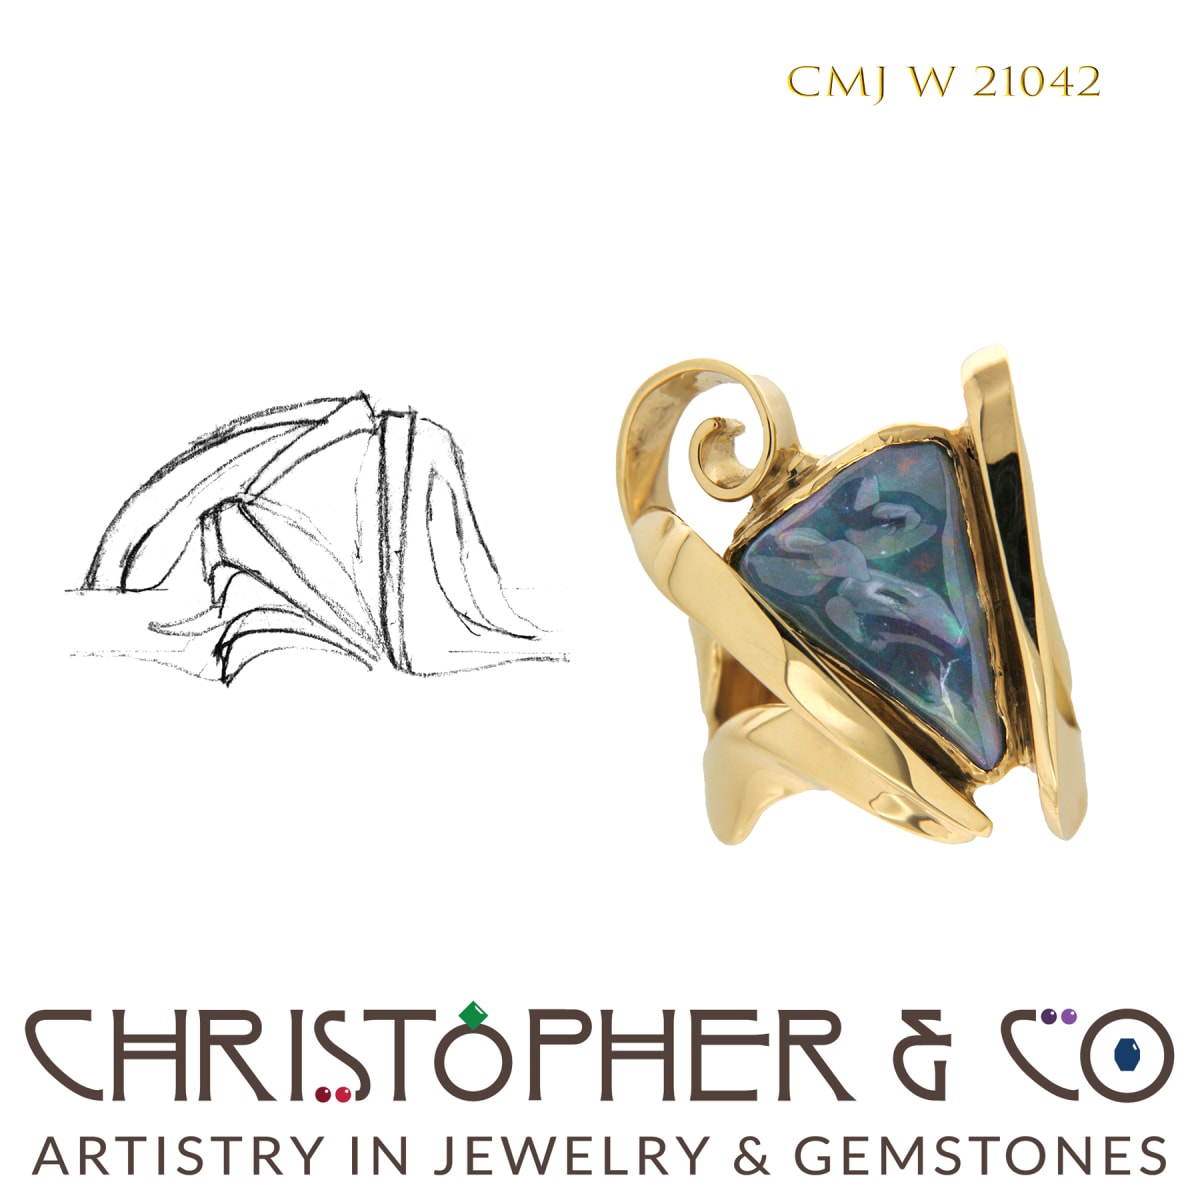 CMJ W 21042 Gold Ring designed by Christopher M. Jupp set with Black Opal  Image: CMJ W 21042 Gold Ring by Christopher M. Jupp set with Black Opal